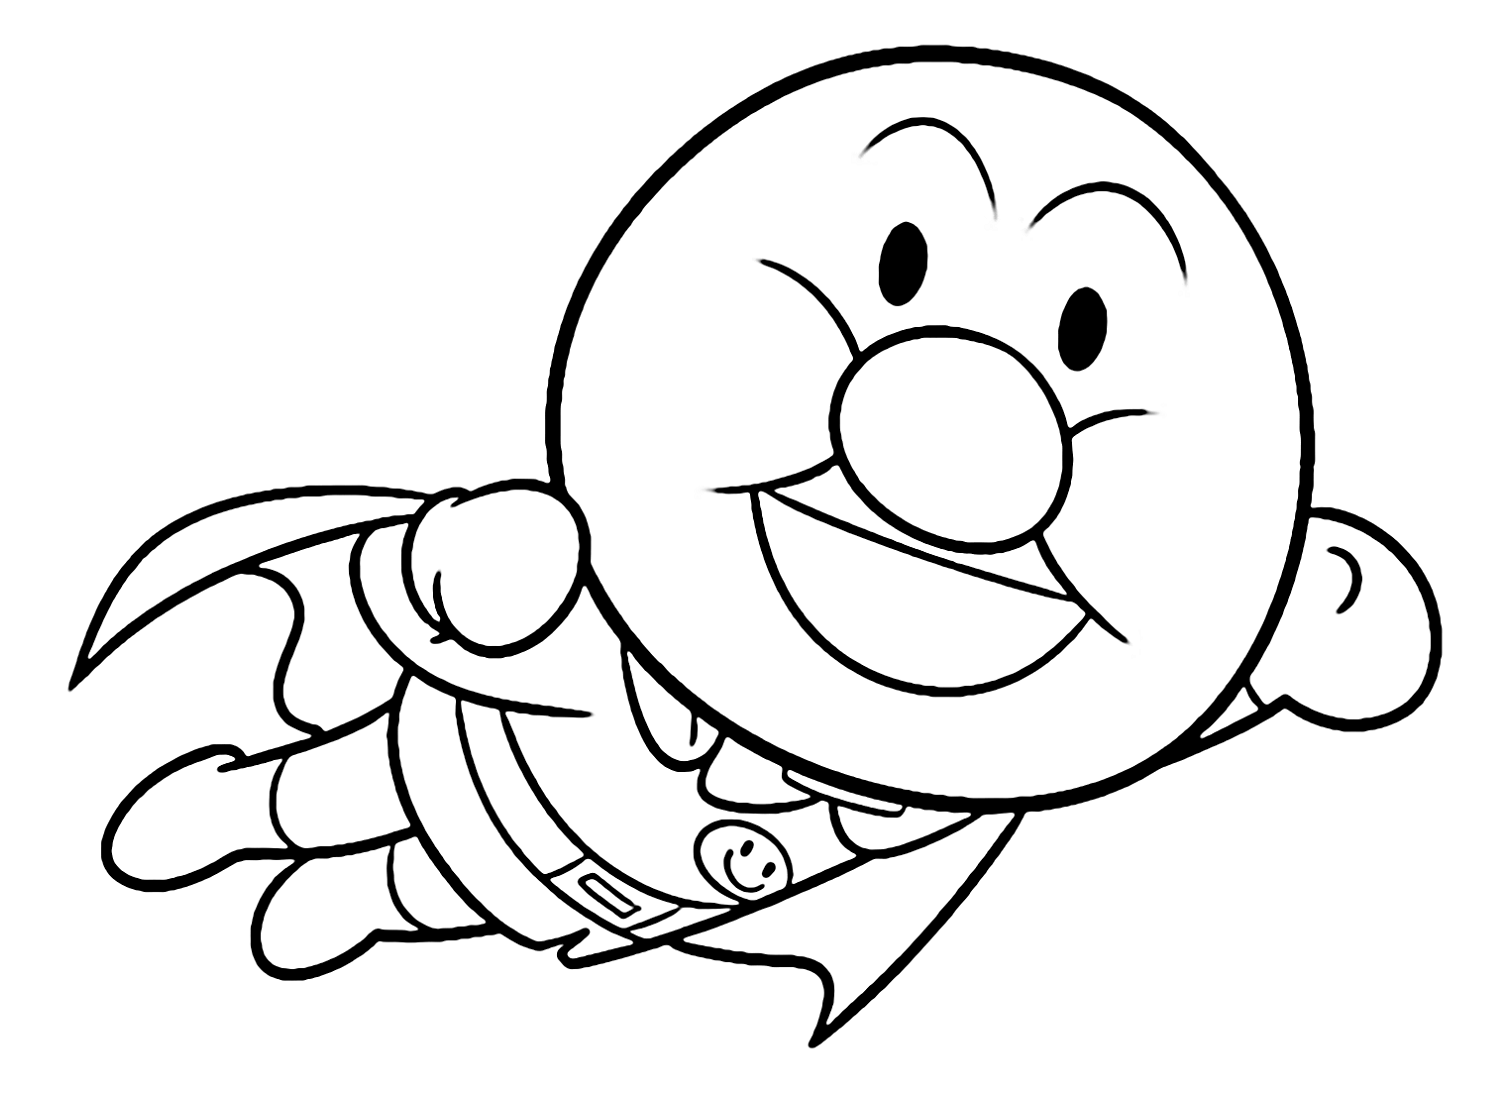 Anpanman coloring pages printable for free download